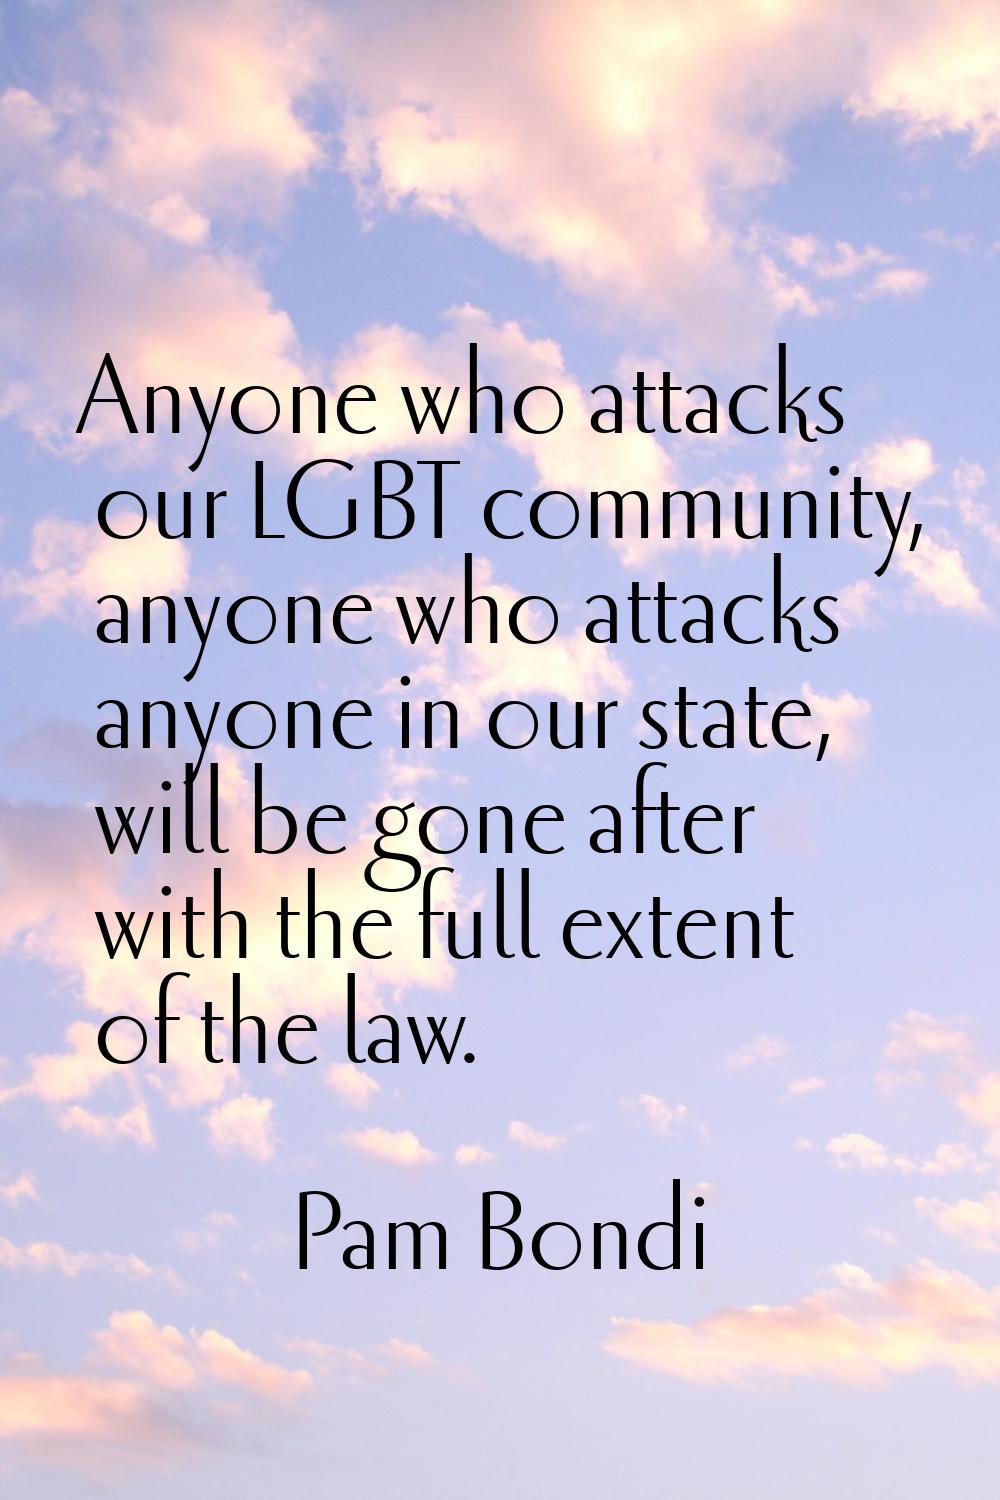 Anyone who attacks our LGBT community, anyone who attacks anyone in our state, will be gone after w